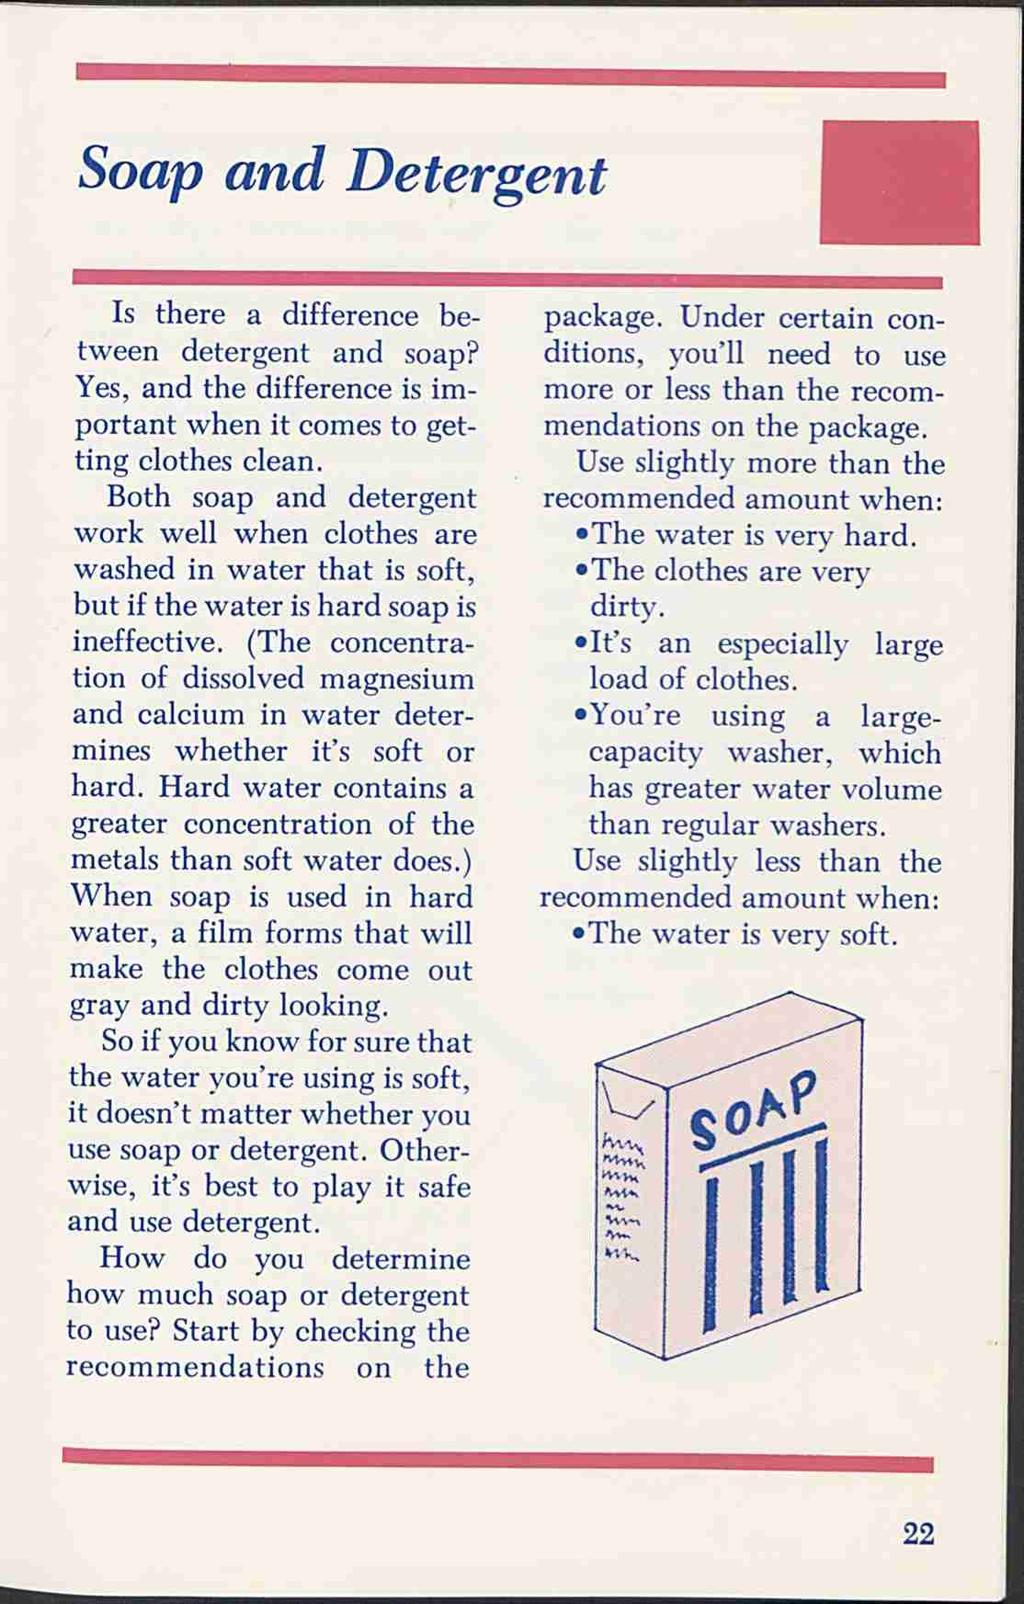 Soap and Detergent Is there a difference between detergent and soap? Yes, and the difference is important when it comes to getting clothes clean.